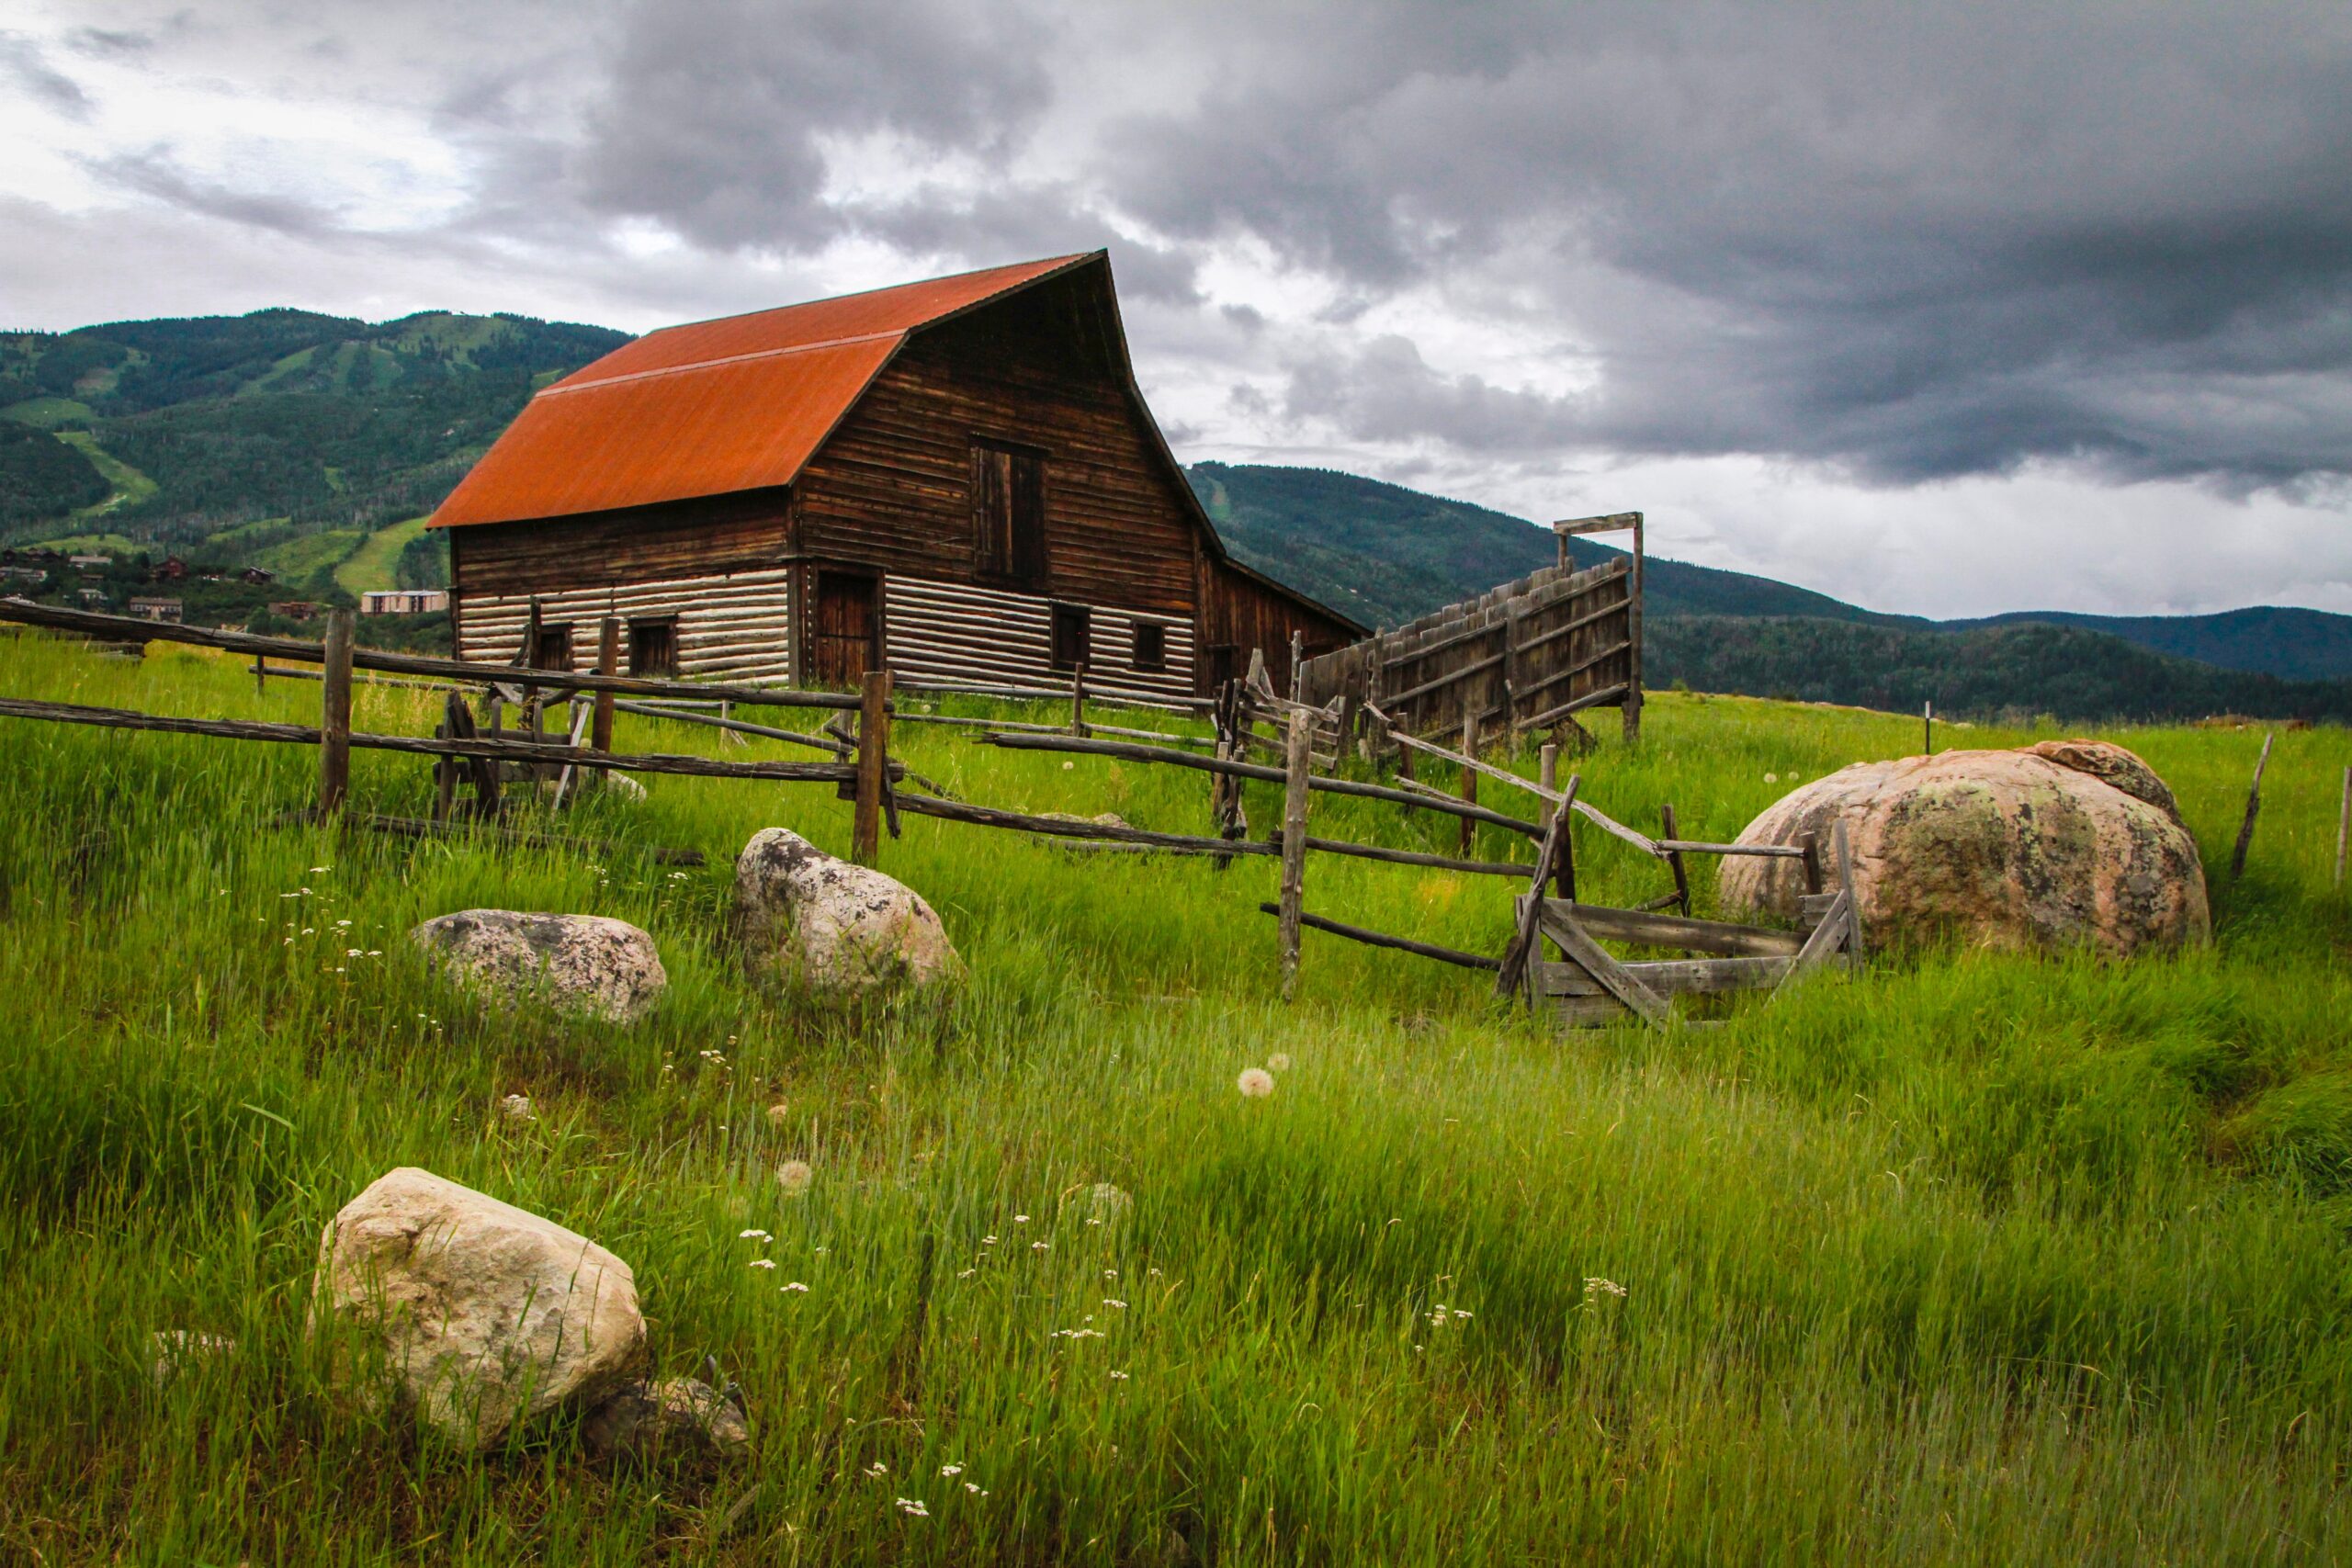 An old barn stands in a field of lush grass and dandelions, in Steamboat Springs